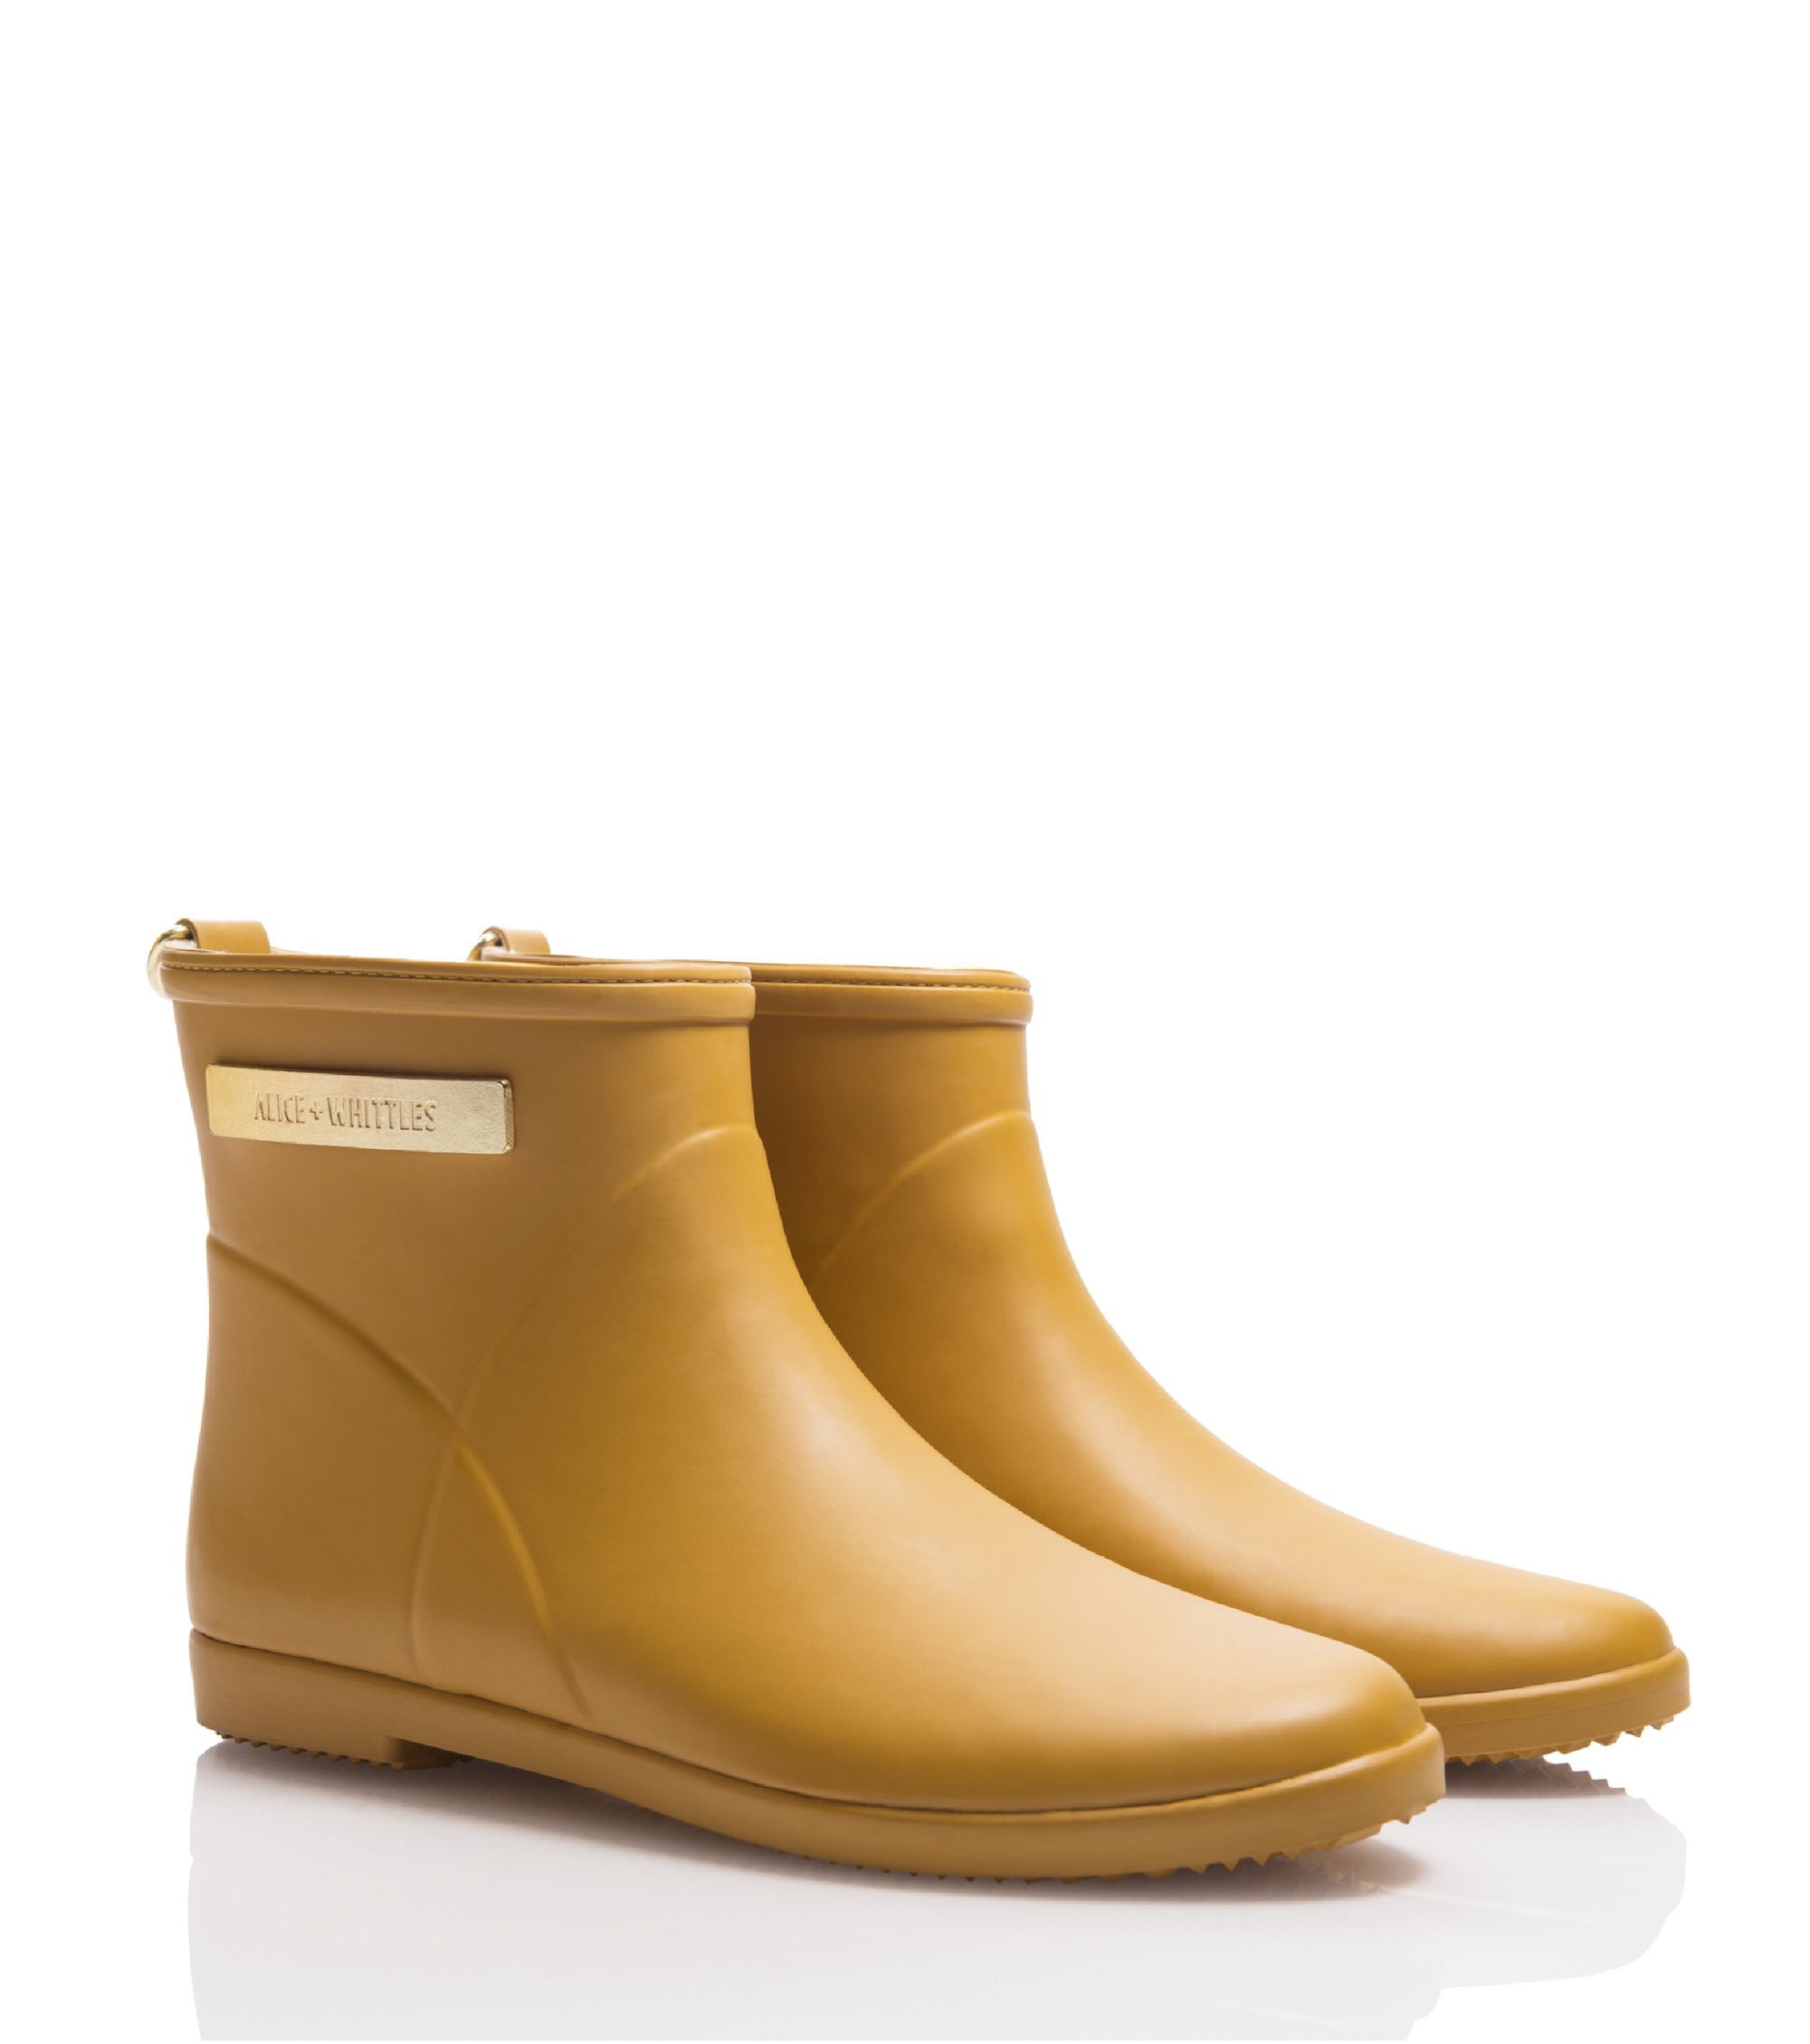 alice-and-whittles-classic-moutarde-dor-ankle-rain-boot-02_8998c34e-512f-476c-ac40-f40076c04662_2000x.jpg